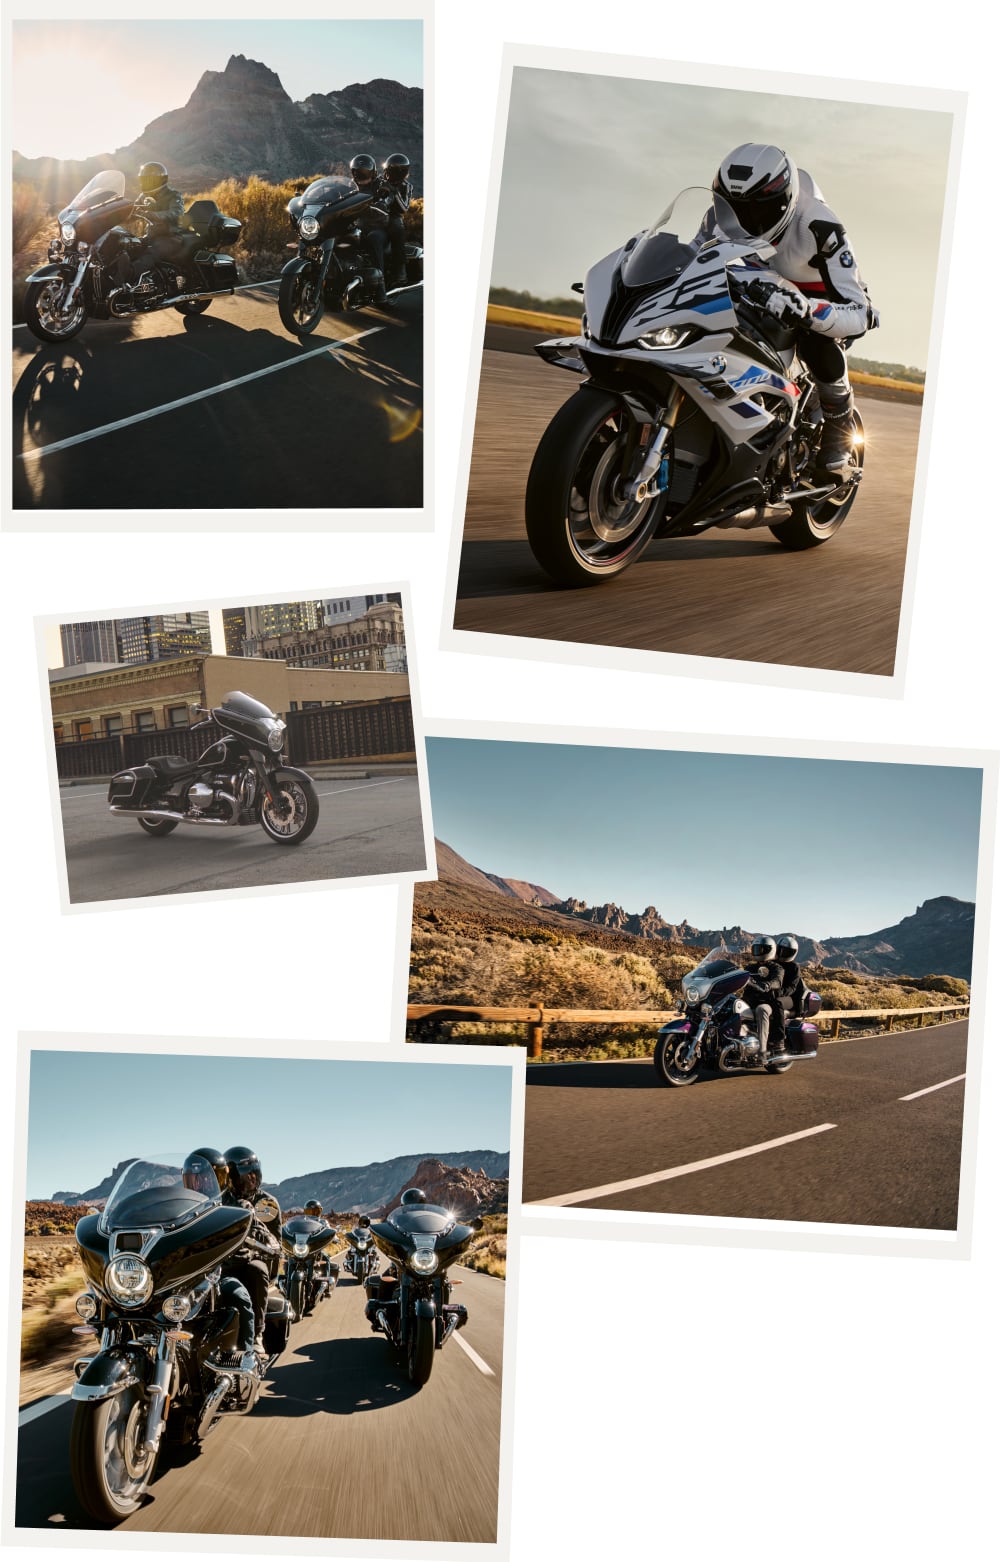 Collage of motorcyclist riding outside various locations and various models of motorcycles